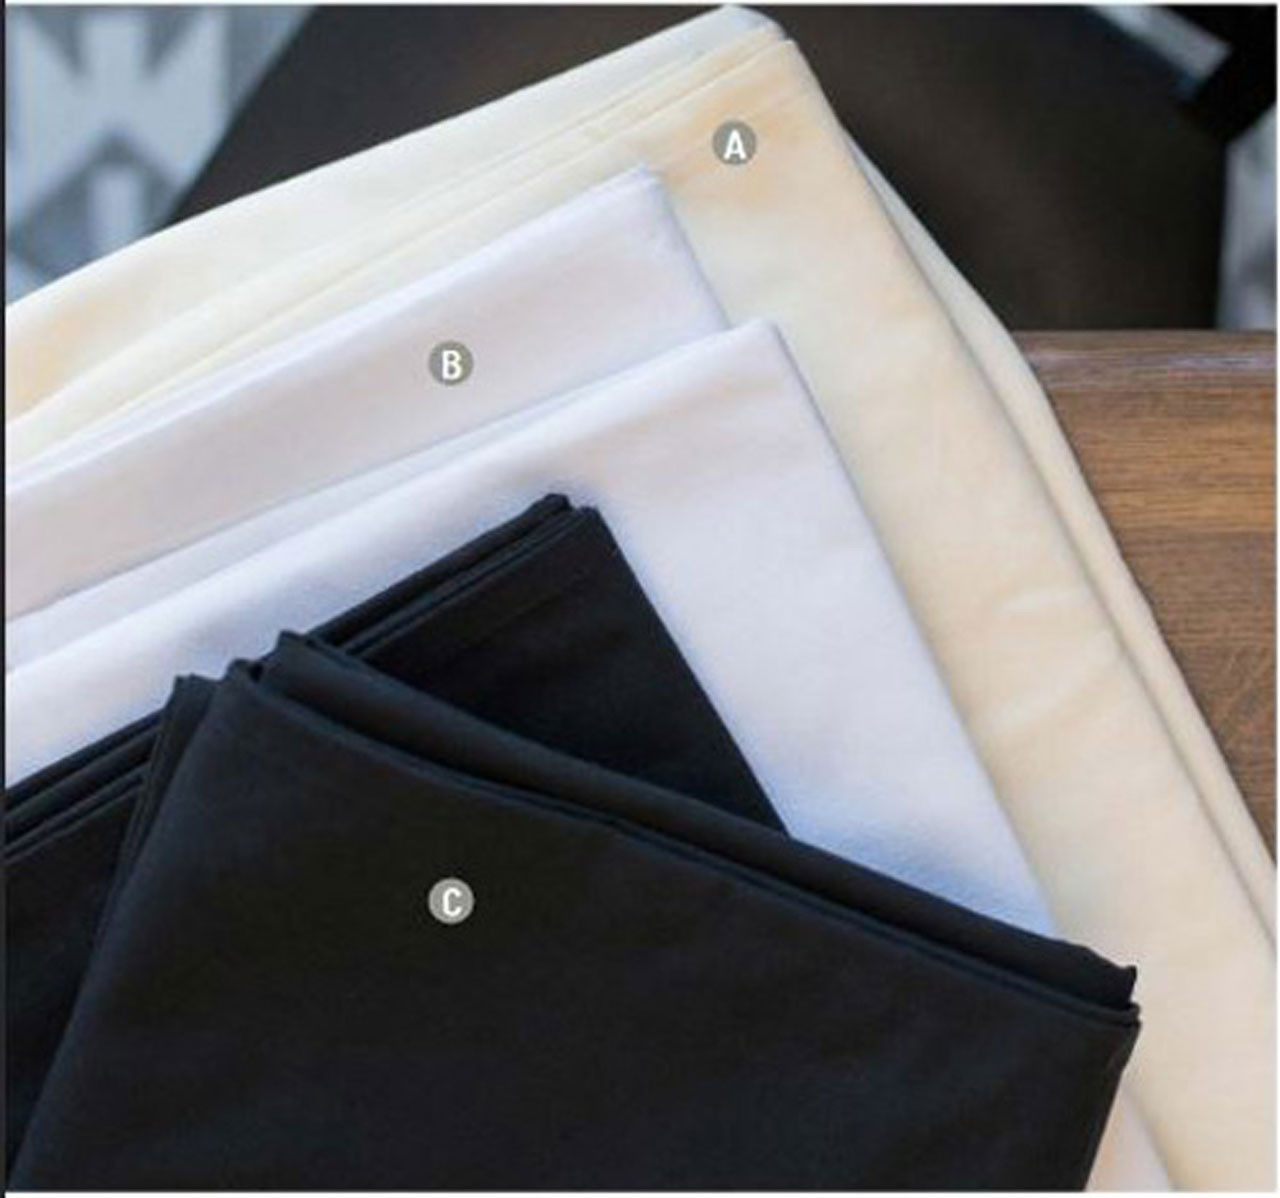 Is the q collection of tablecloths suitable for restaurant use?